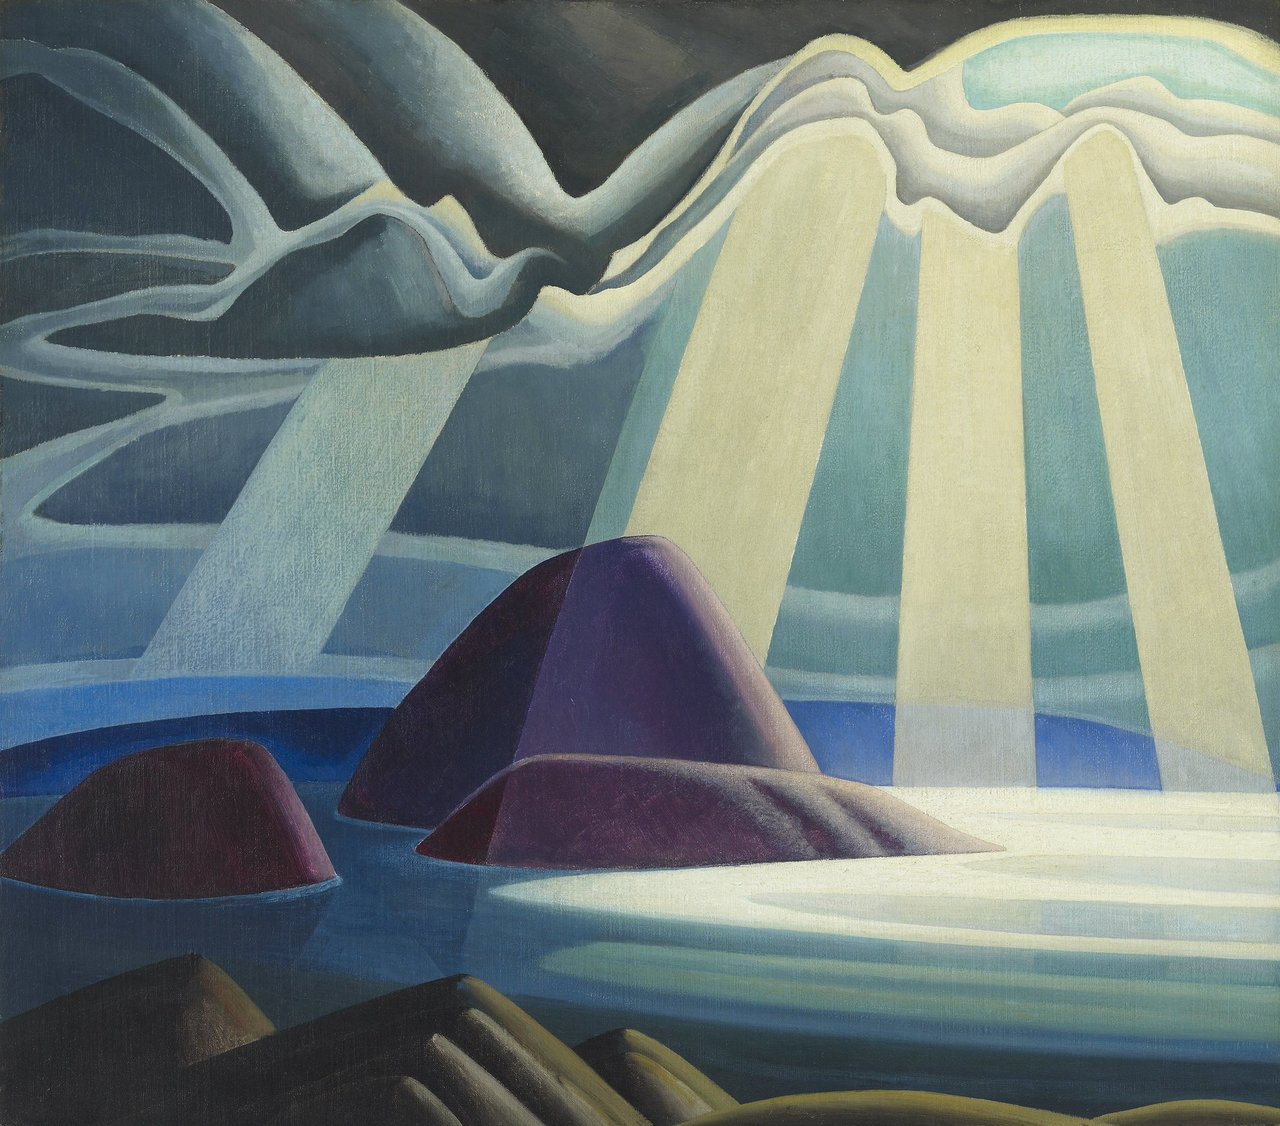 Happy #HumpDay! Unwind with serene landscapes by #LawrenHarris. Admission free tonight after 4 pm! https://t.co/4VzzGcSpDS